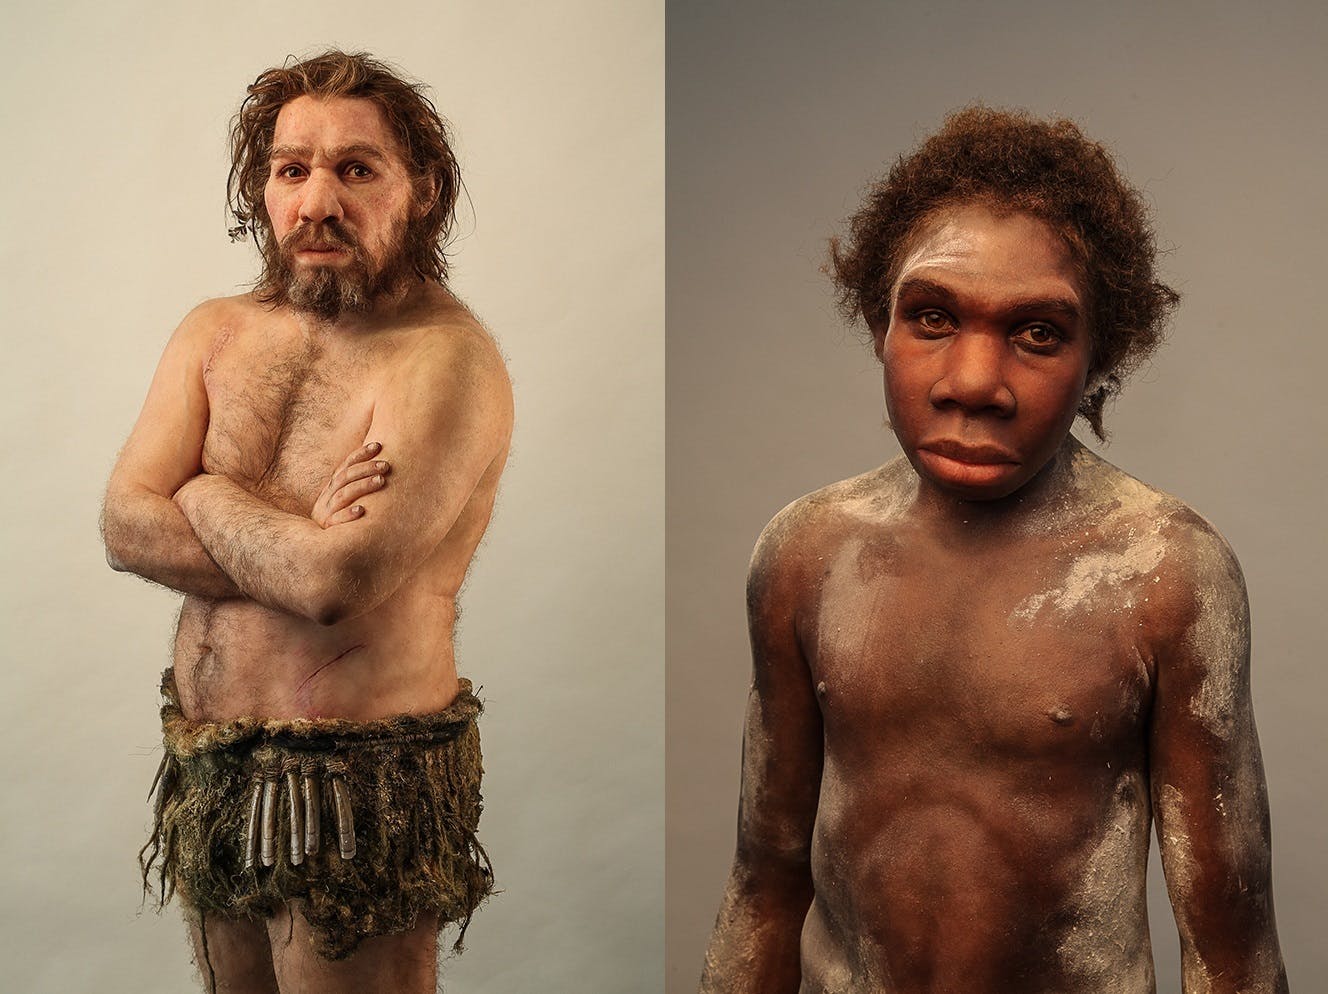 Two sculptures, created by French paleoartist Elisabeth Daynès, give a breathtakingly lifelike look at human relatives—Homo ergaster and Homo neanderthalensis.